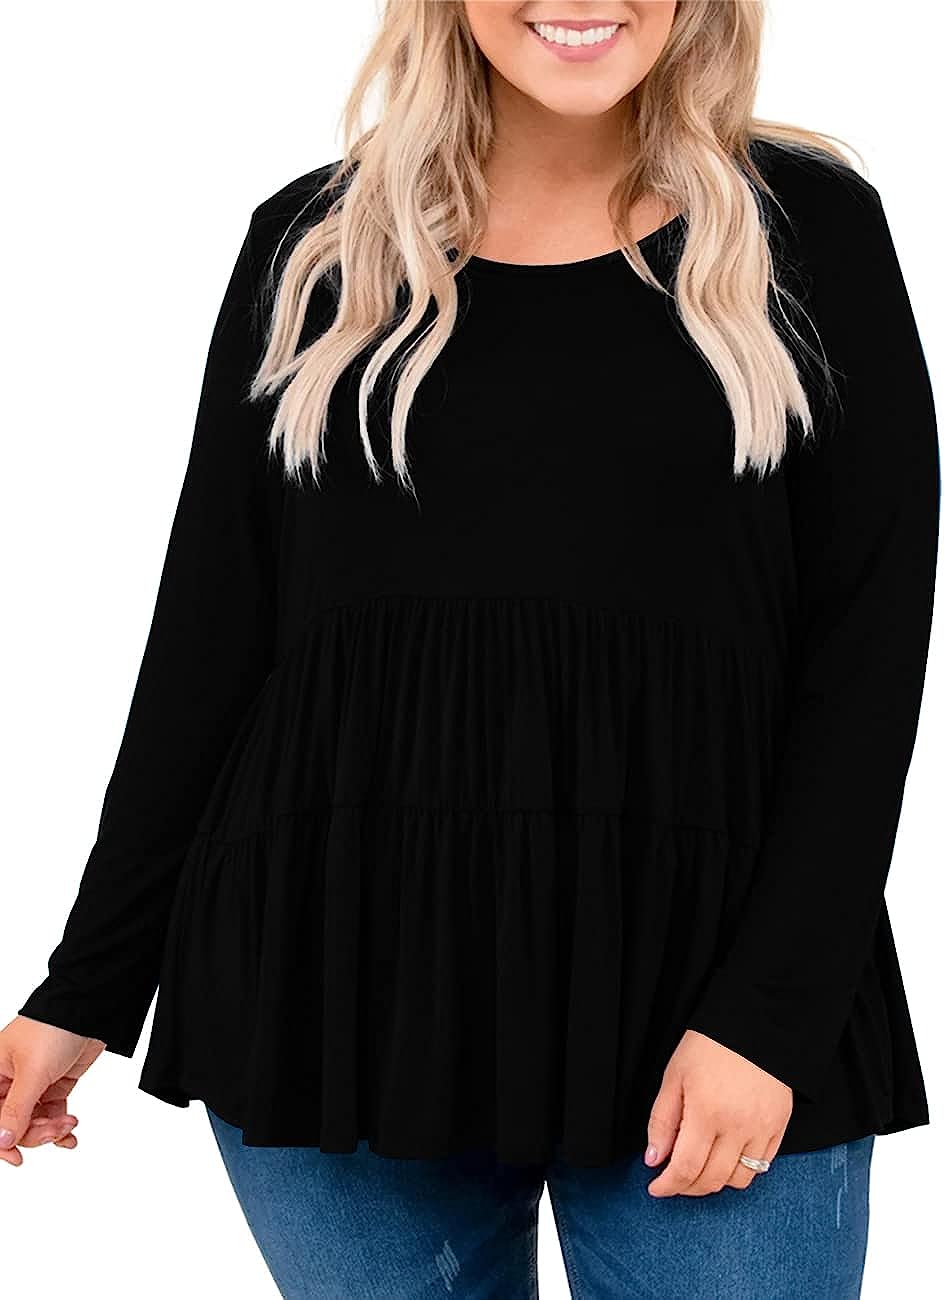 Plus Size Tunic for Women Double Ruffle Short Sleeve Clothes Loose Fit  Clothing Flowy Shirts Summer Tops